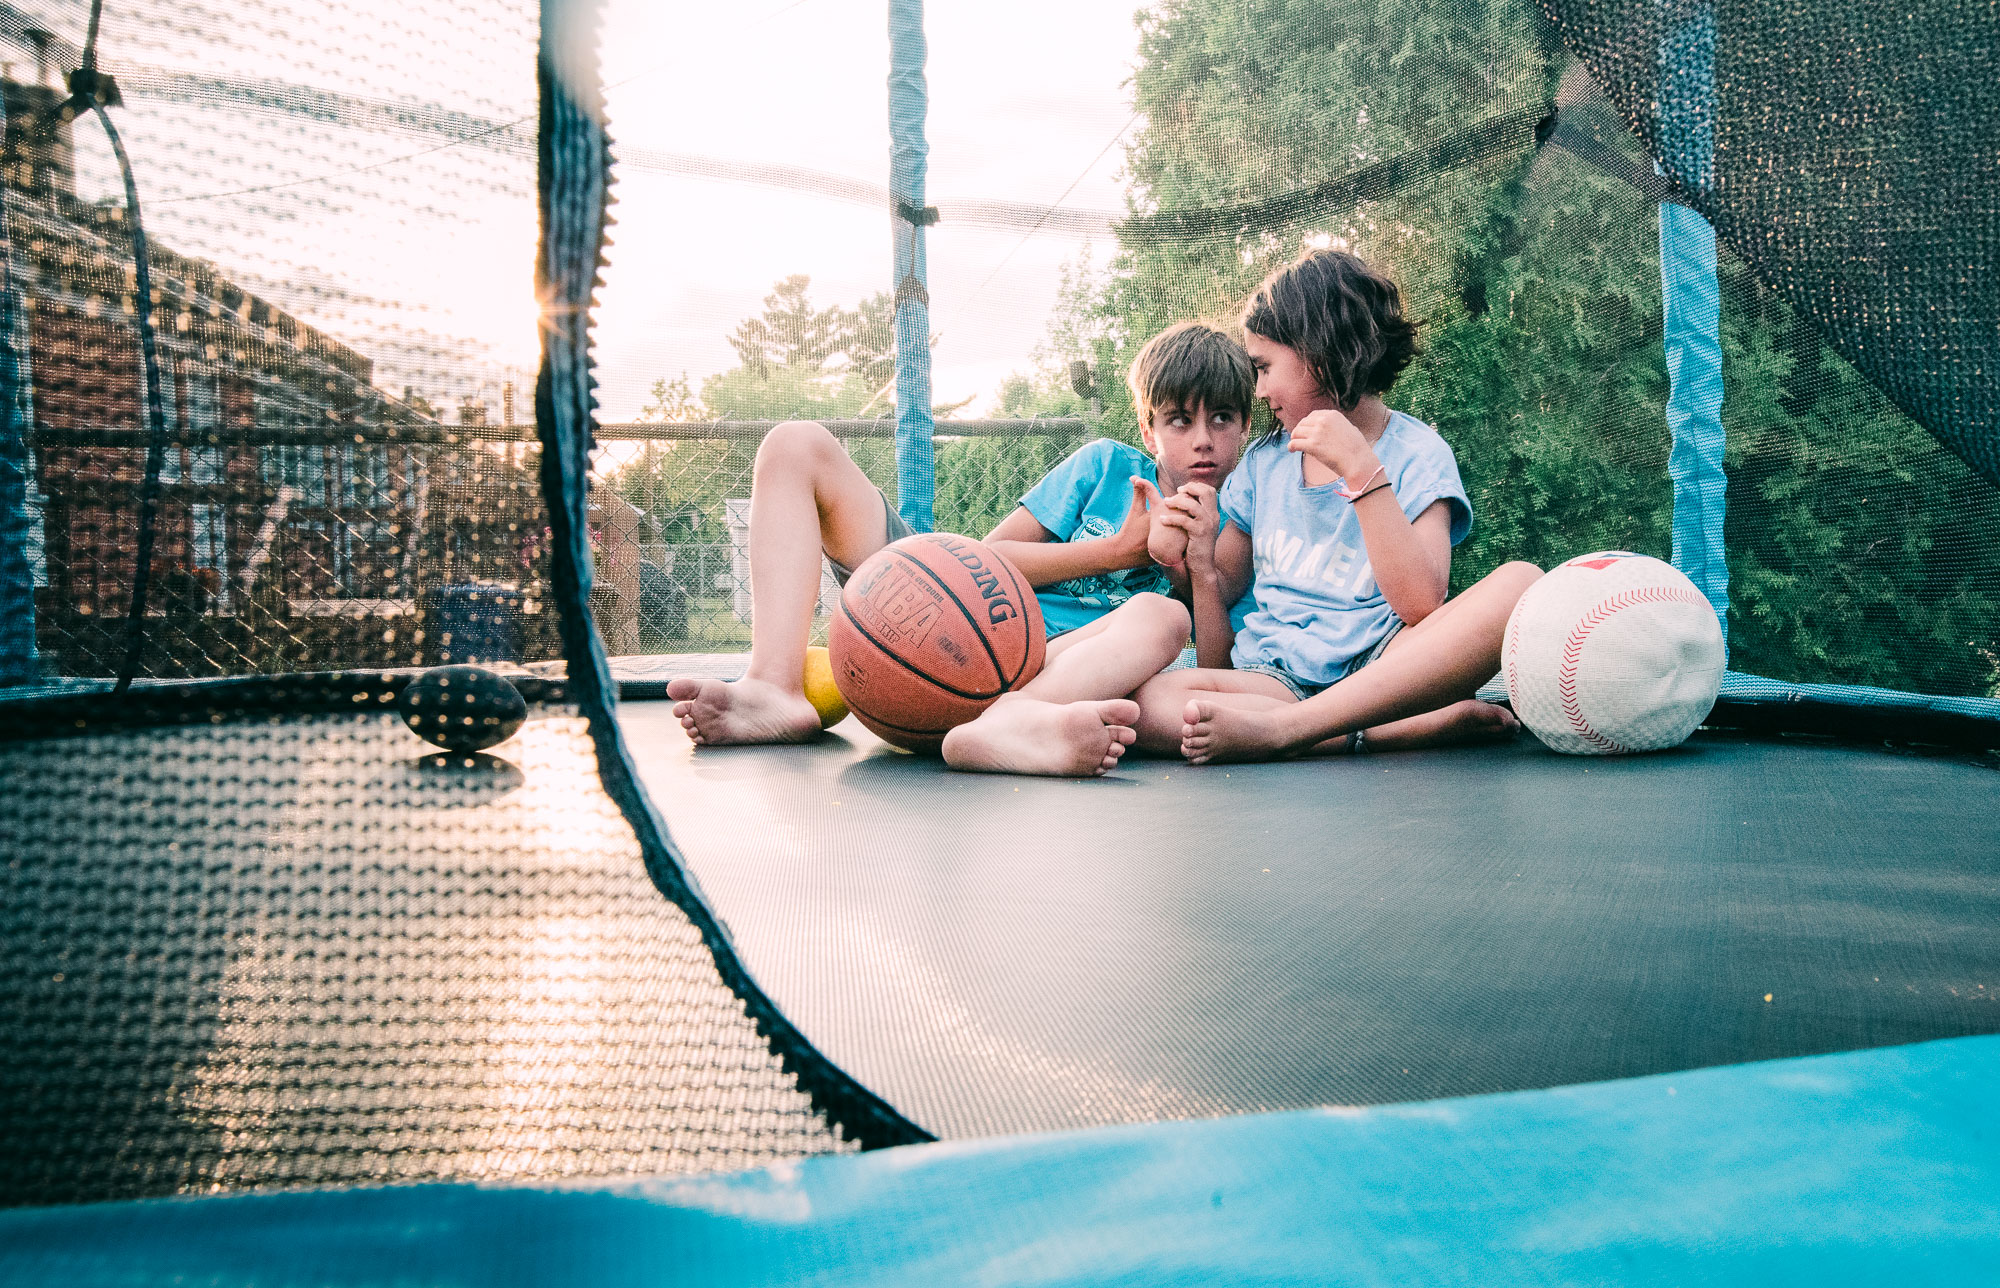 kids sitting together on trampoline - documentary family photography